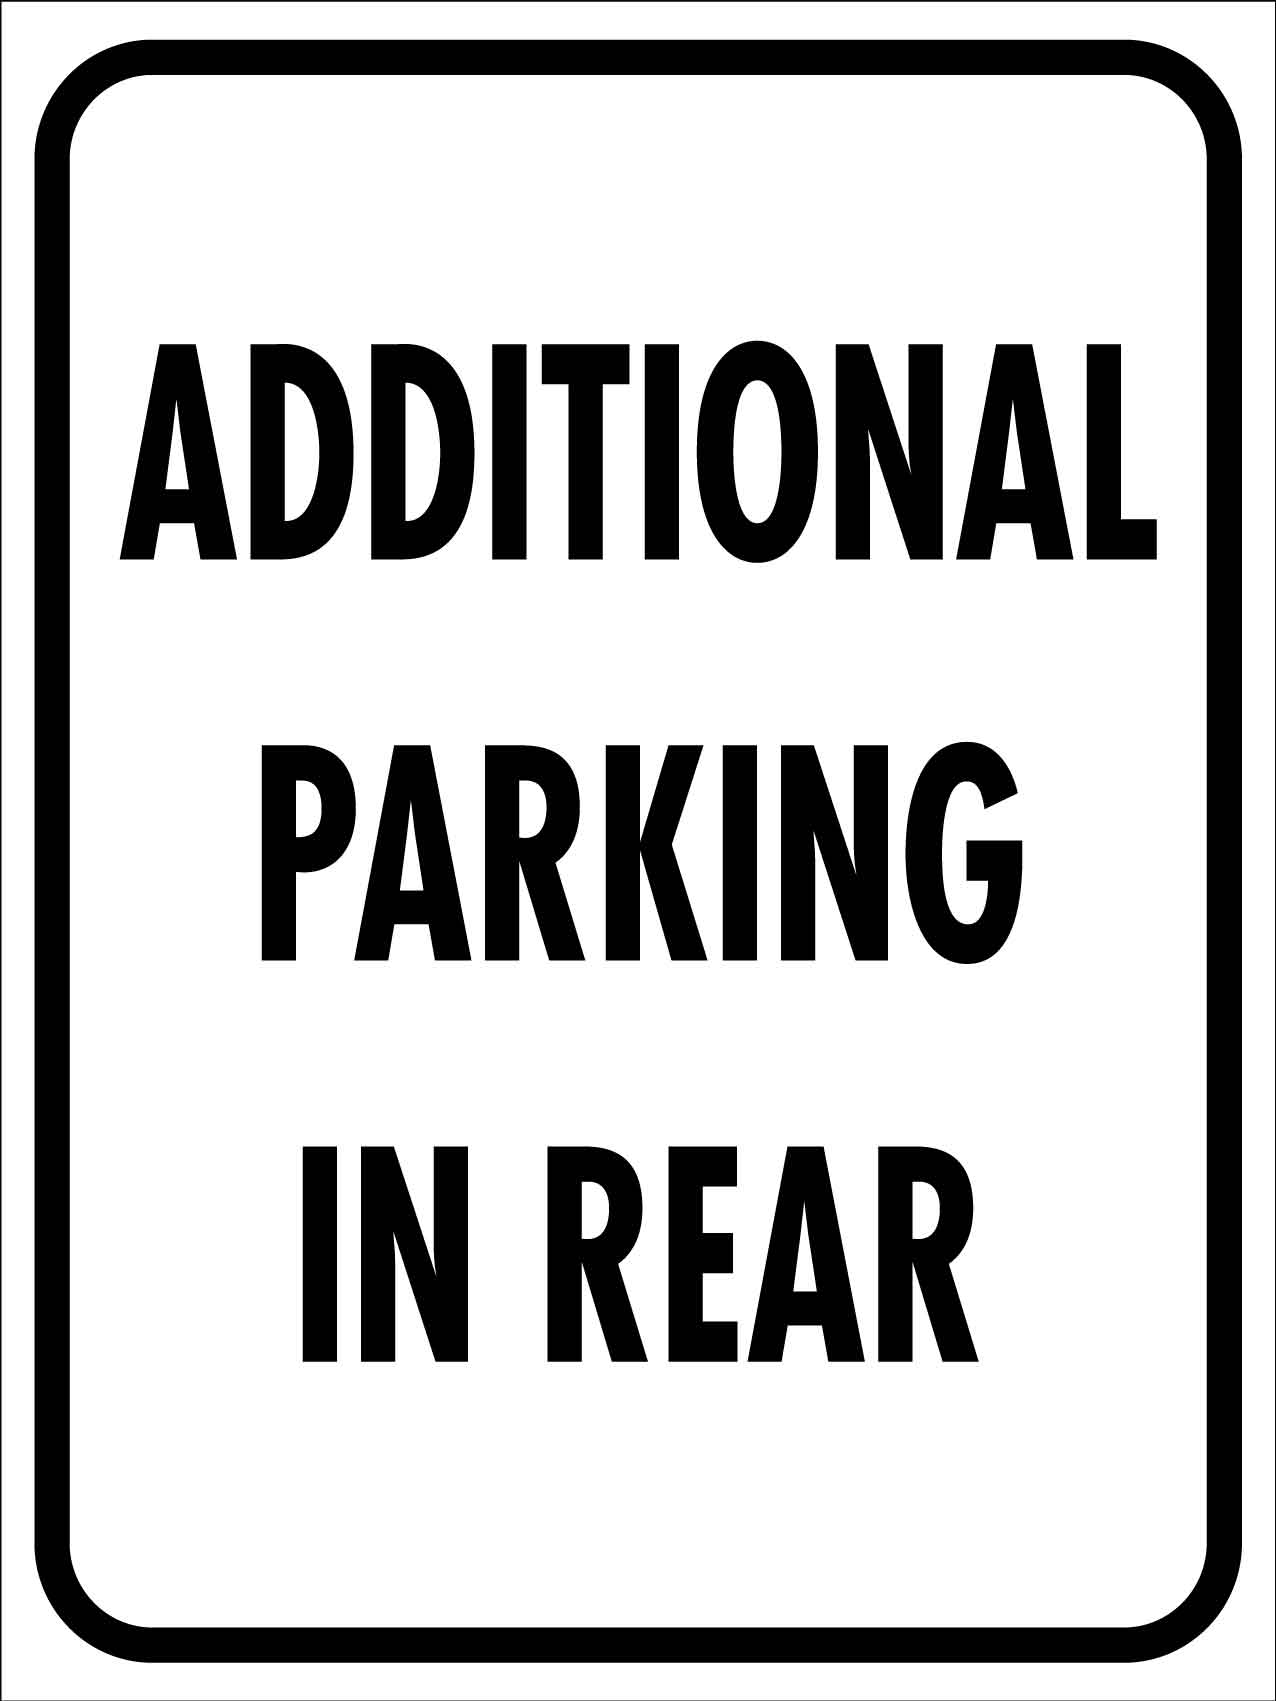 Additional Parking in Rear Sign